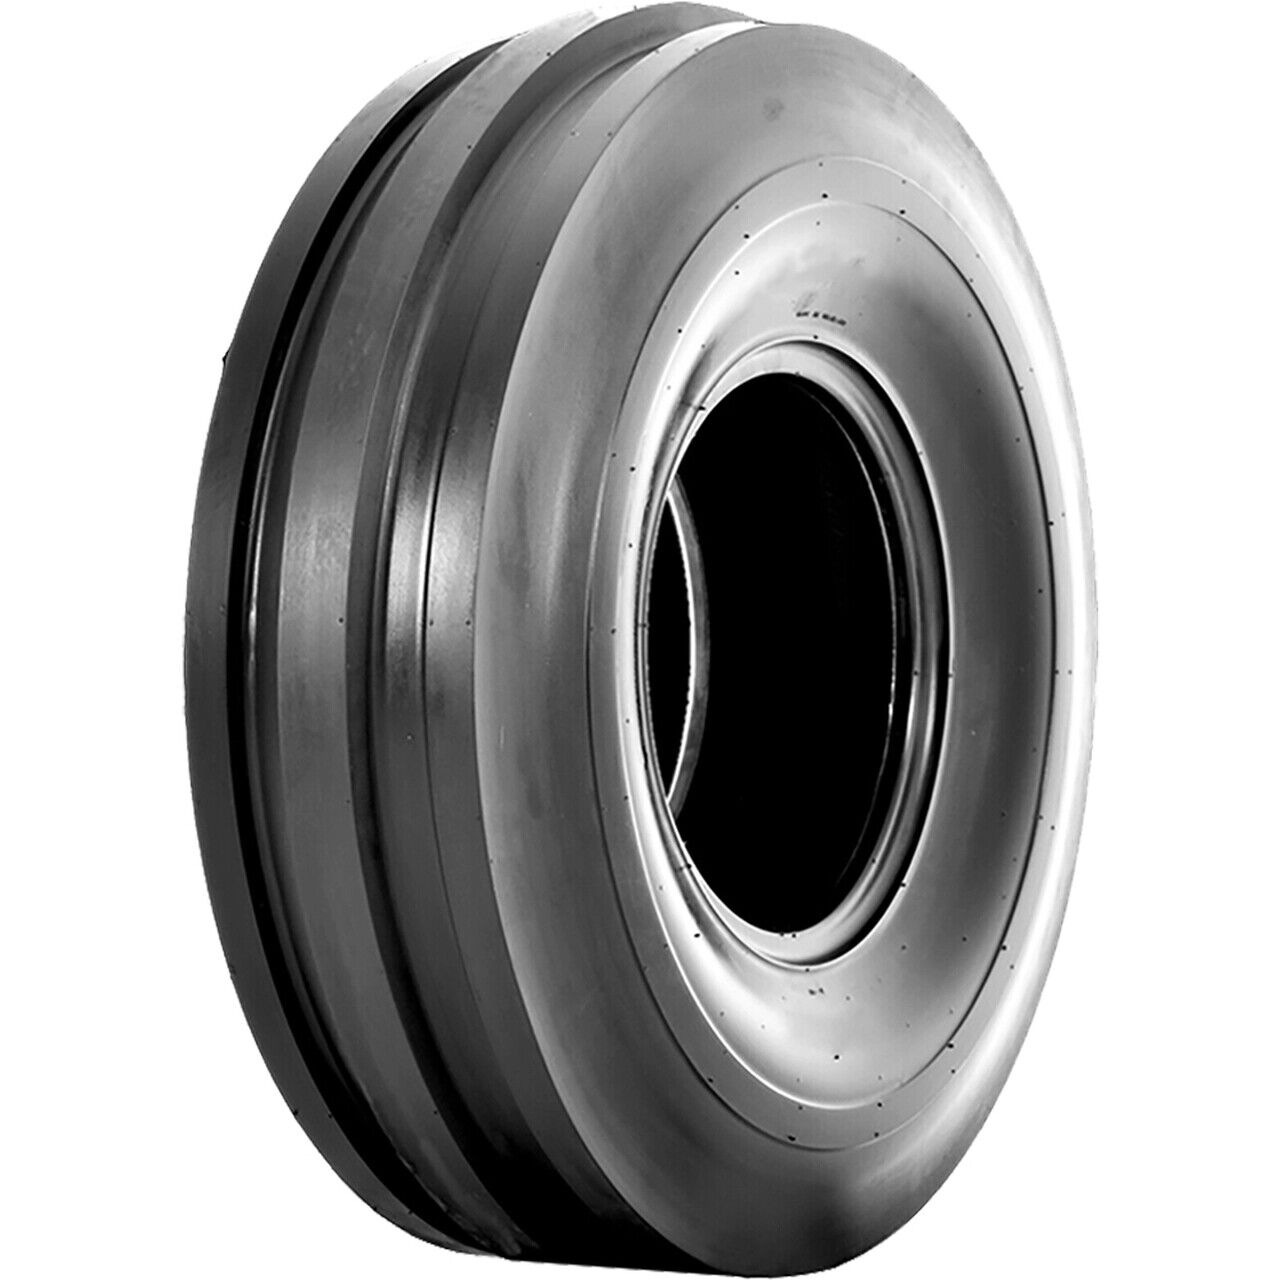 Tire Agstar 3340 9.5-15 Load 8 Ply Tractor